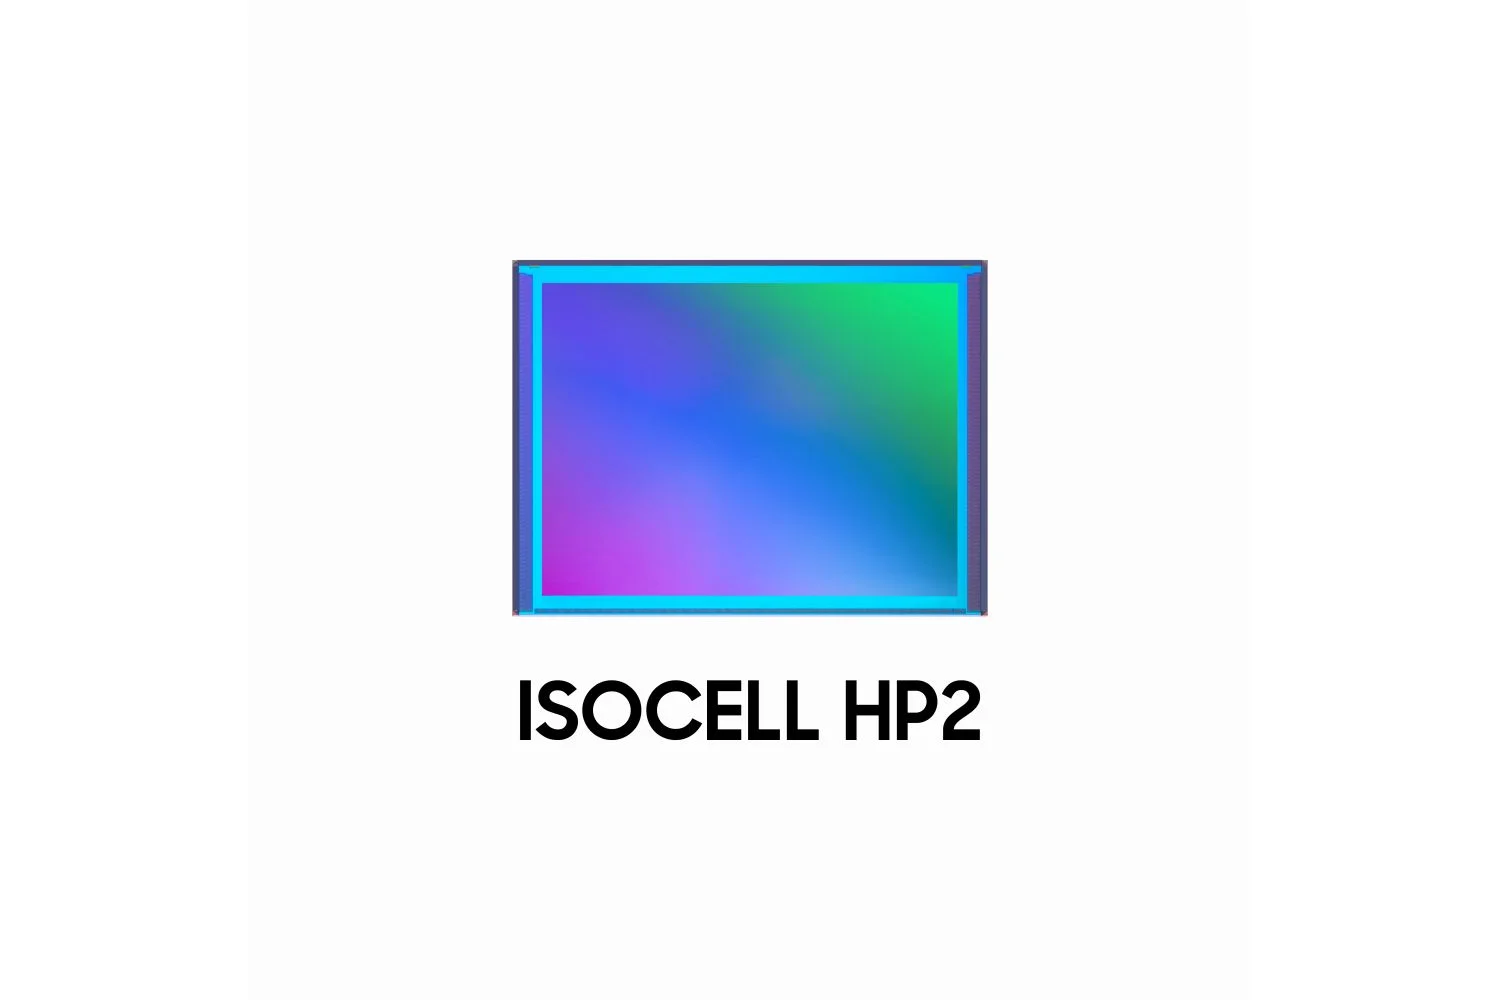 Samsung ISOCELL HP2 1